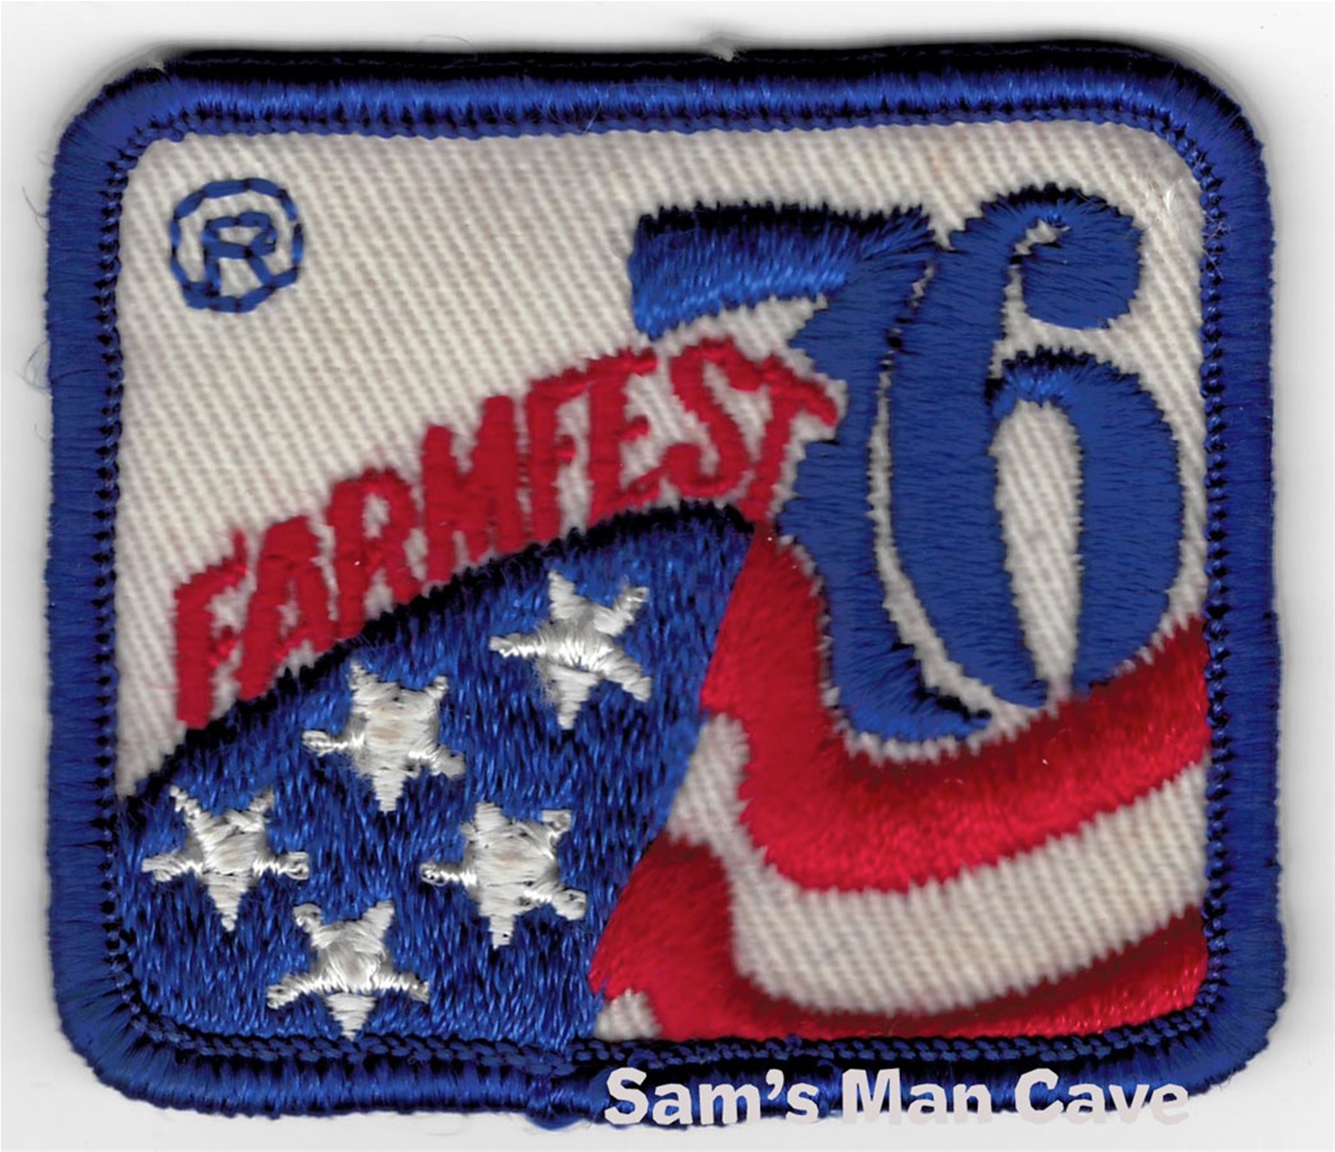 Schell's Farmfest 76 Beer Patch front of patch